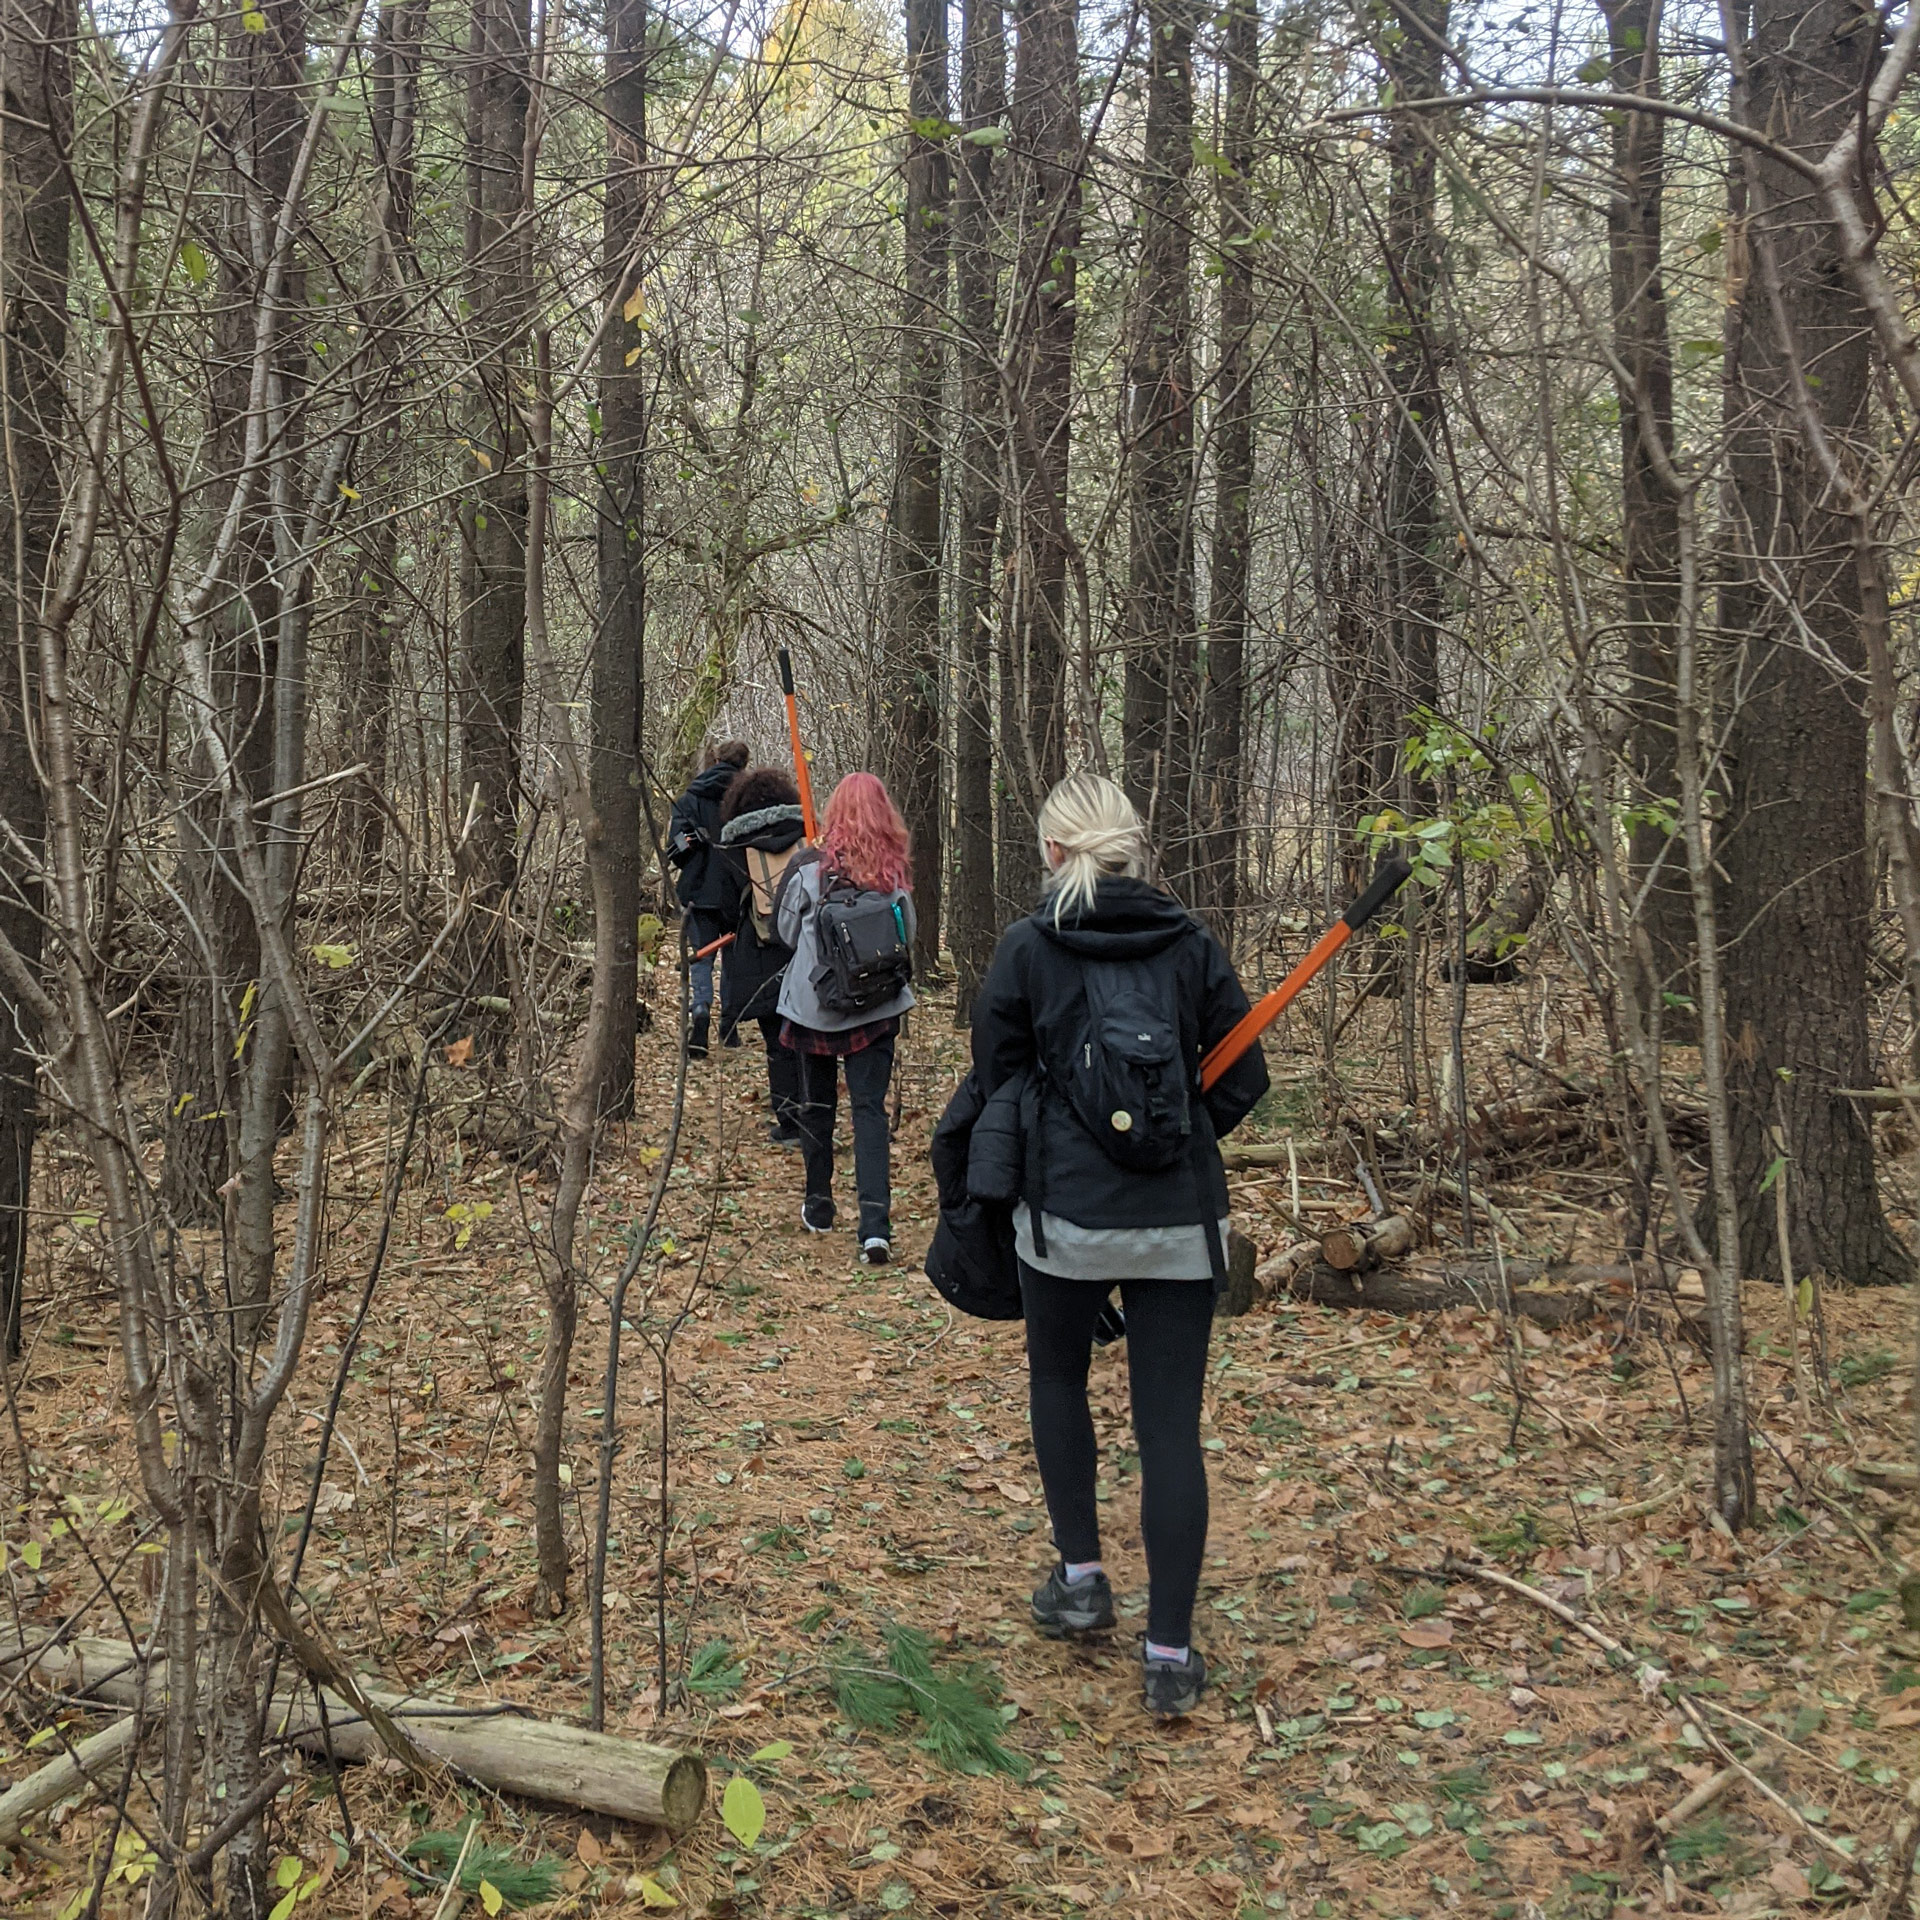 People hiking with backpacks through a forest